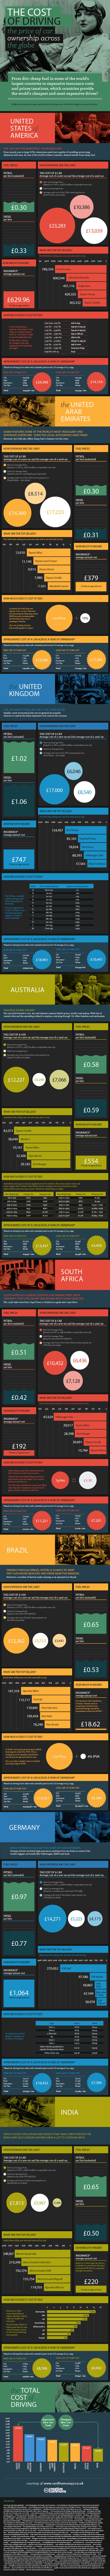 The Cost of Car Ownership across the World - An Infographic A Mum Reviews